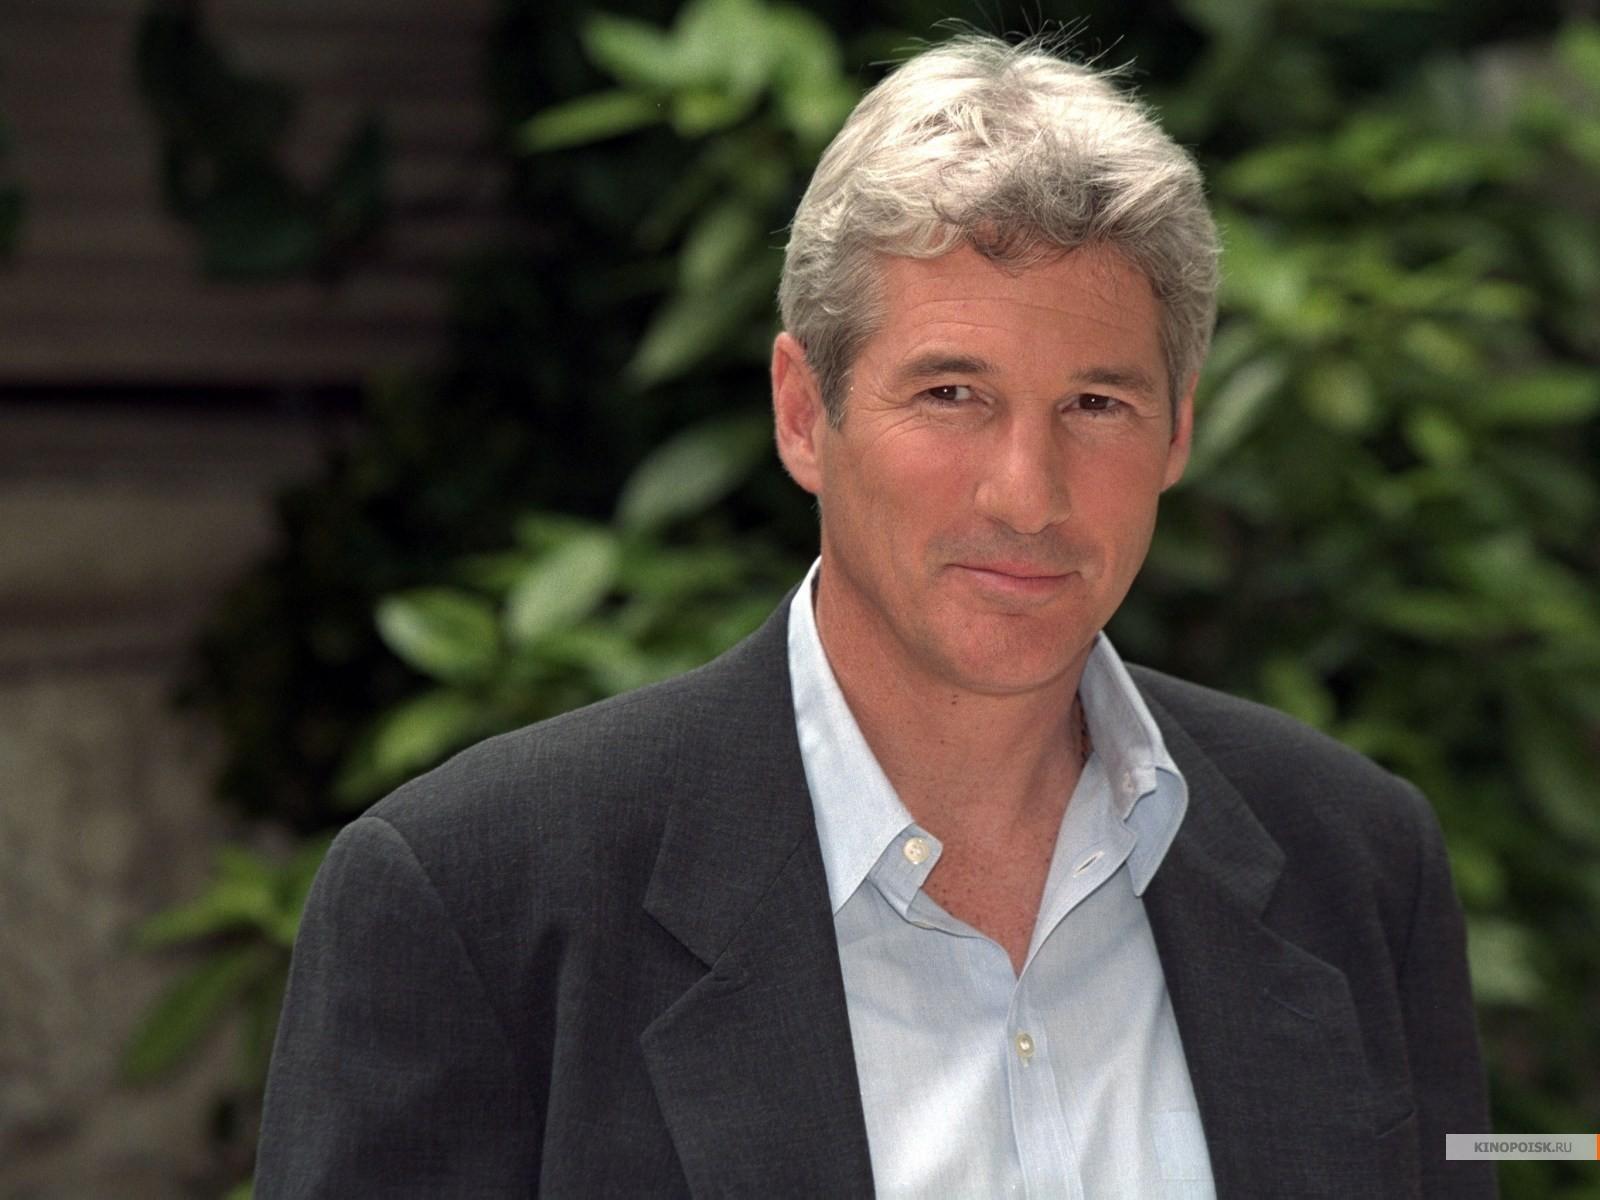 Richard Gere image Richard Gere HD wallpaper and background photo